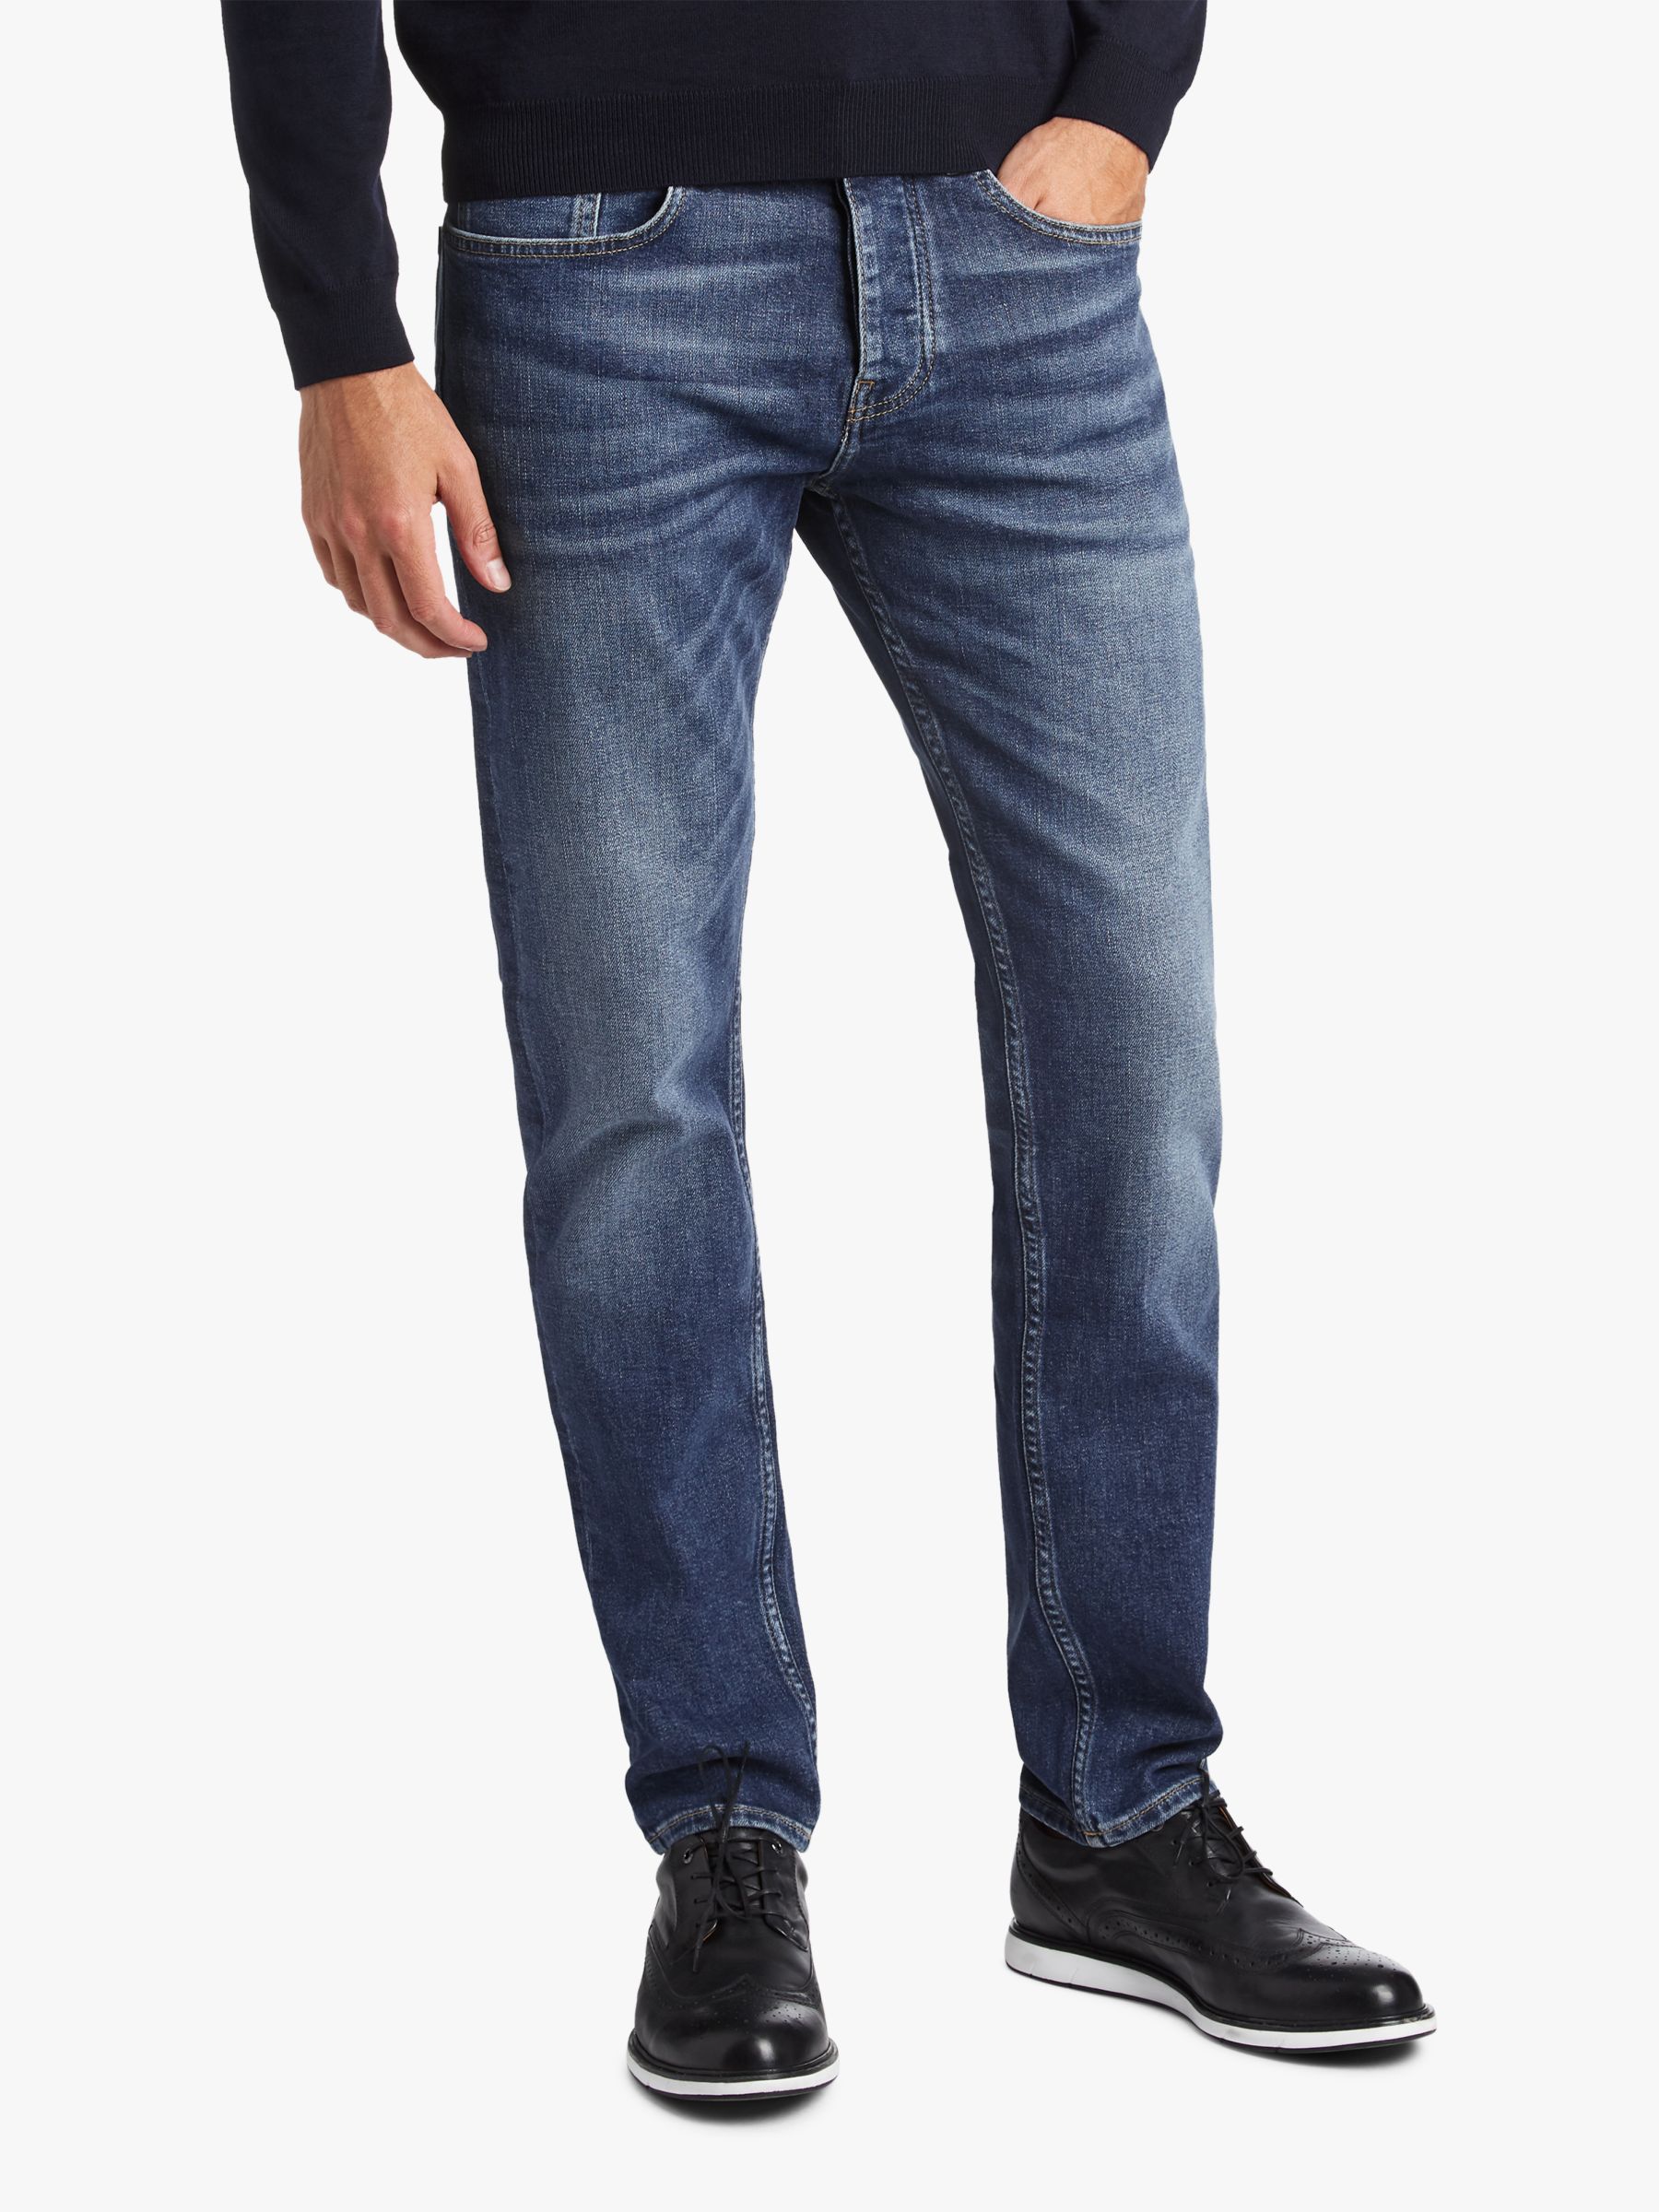 BOSS Taber BC Tapered Fit Jeans, Medium 